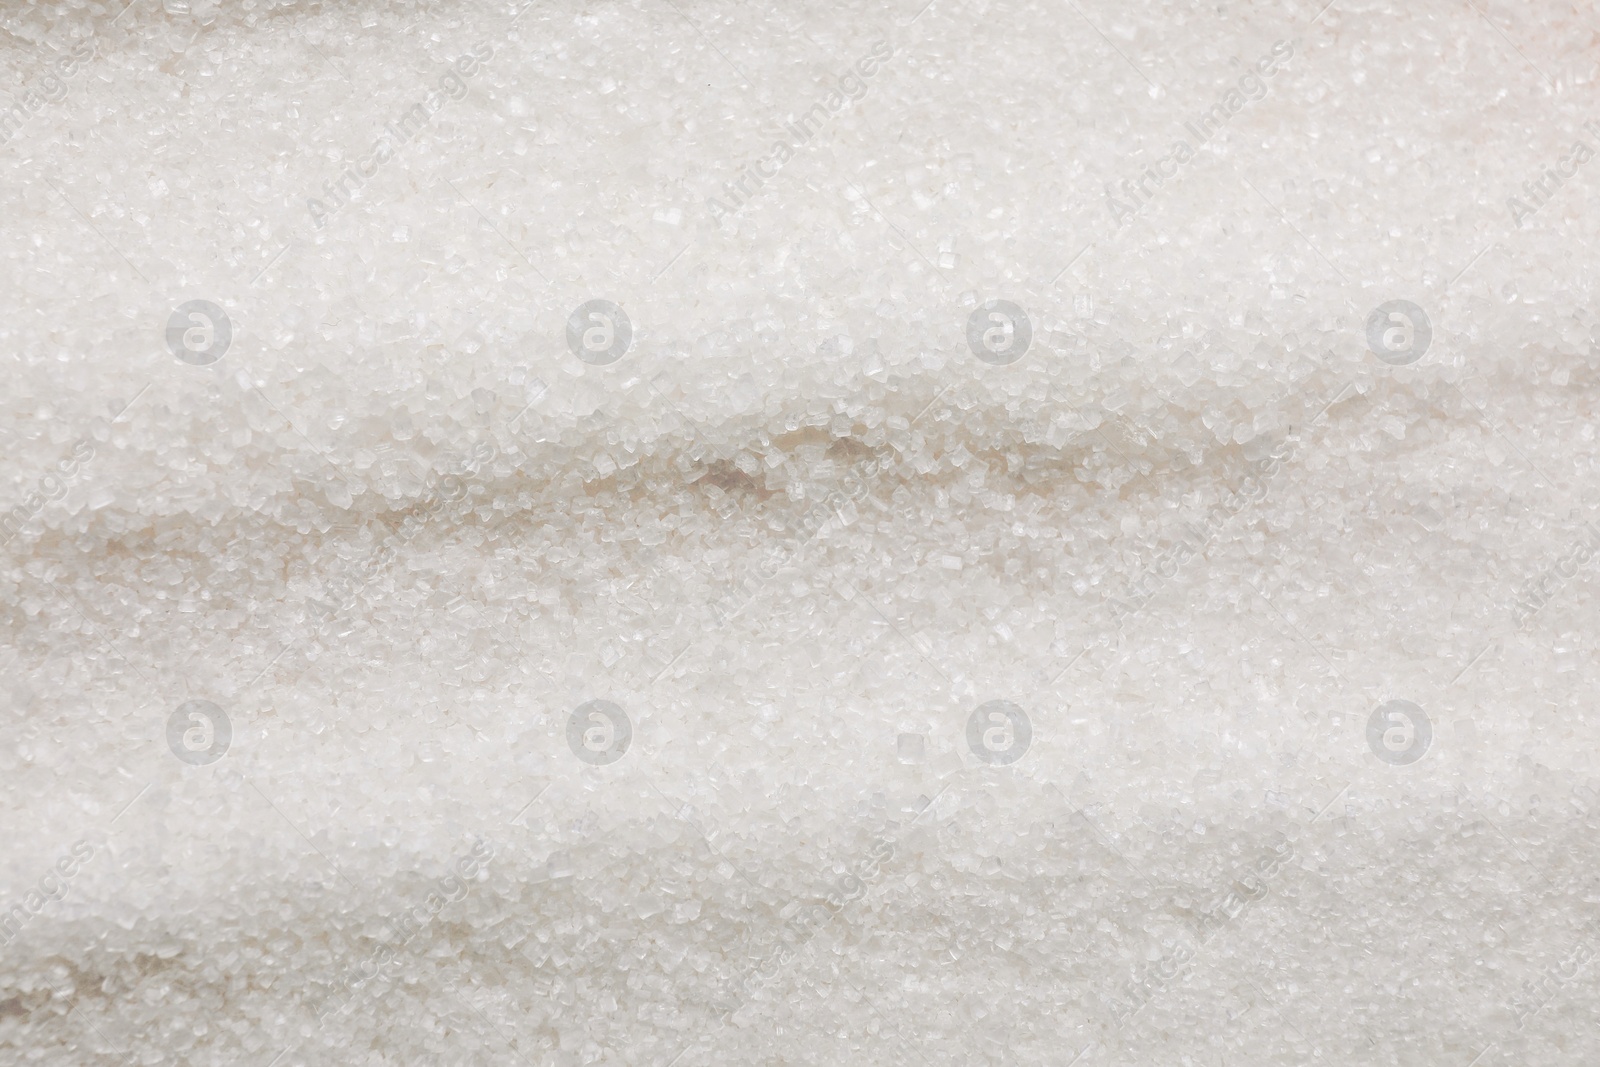 Photo of Granulated white sugar as background, top view